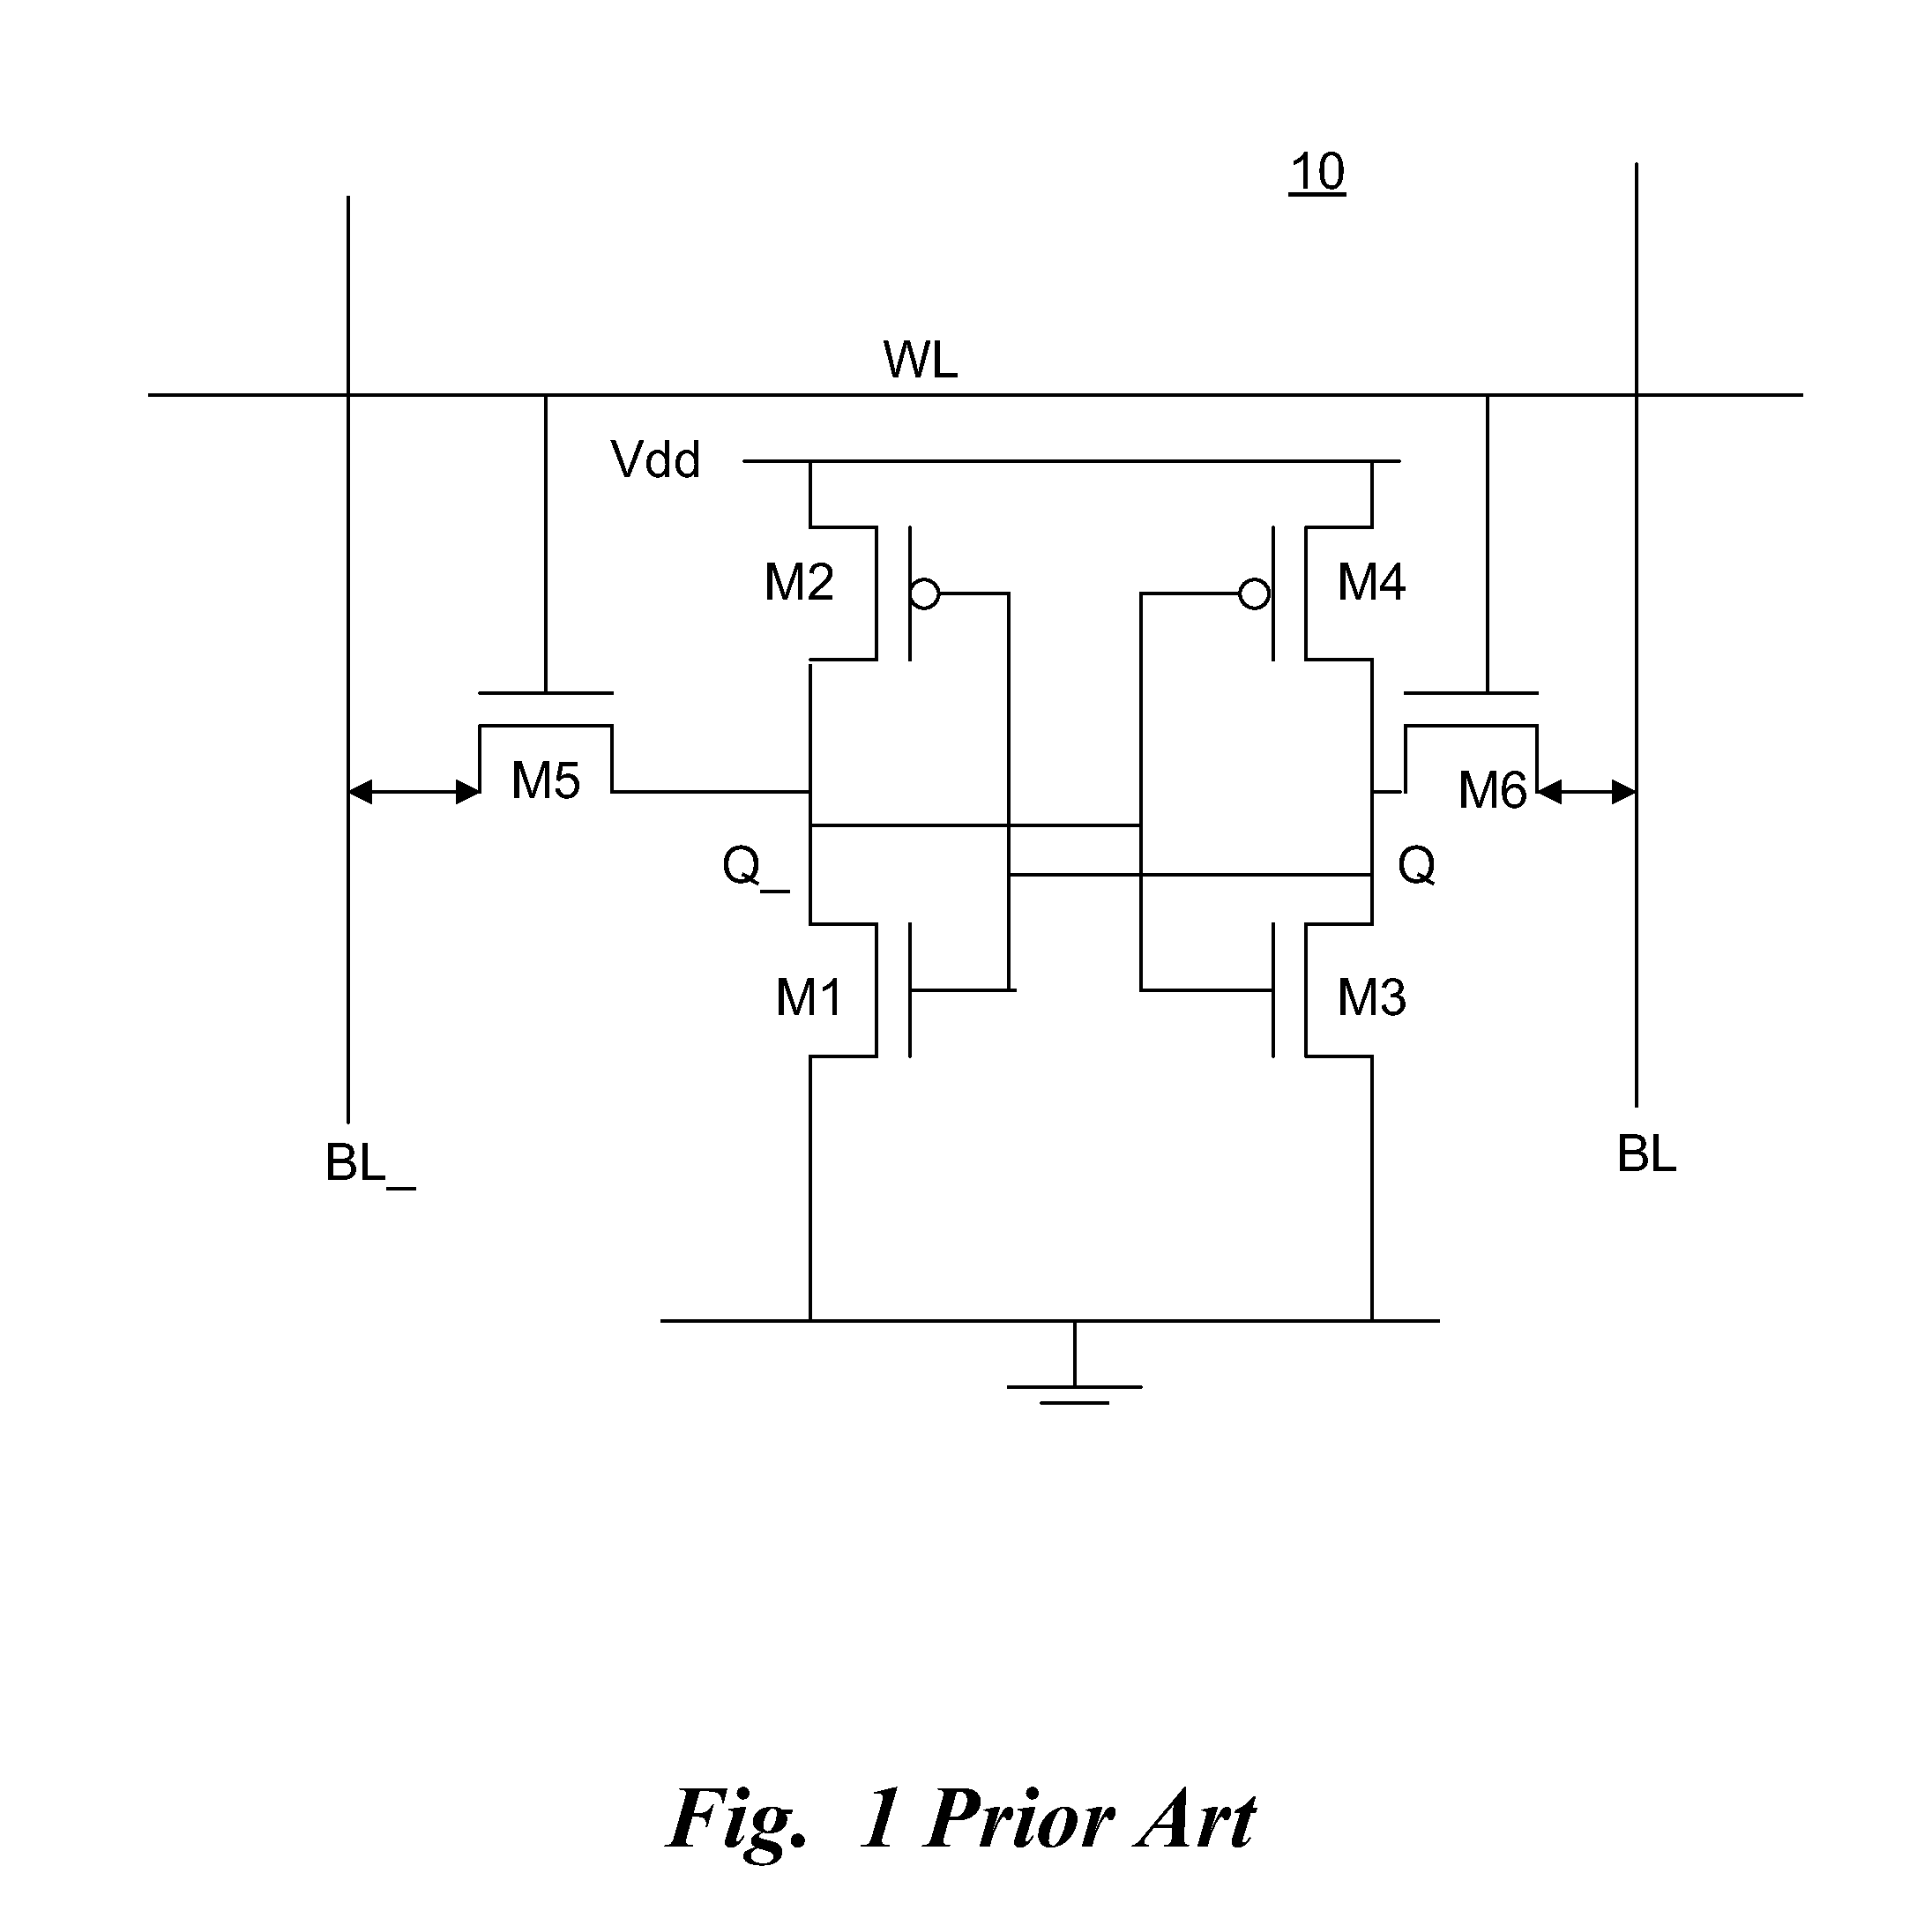 Circuit and Method for Small Swing Memory Signals